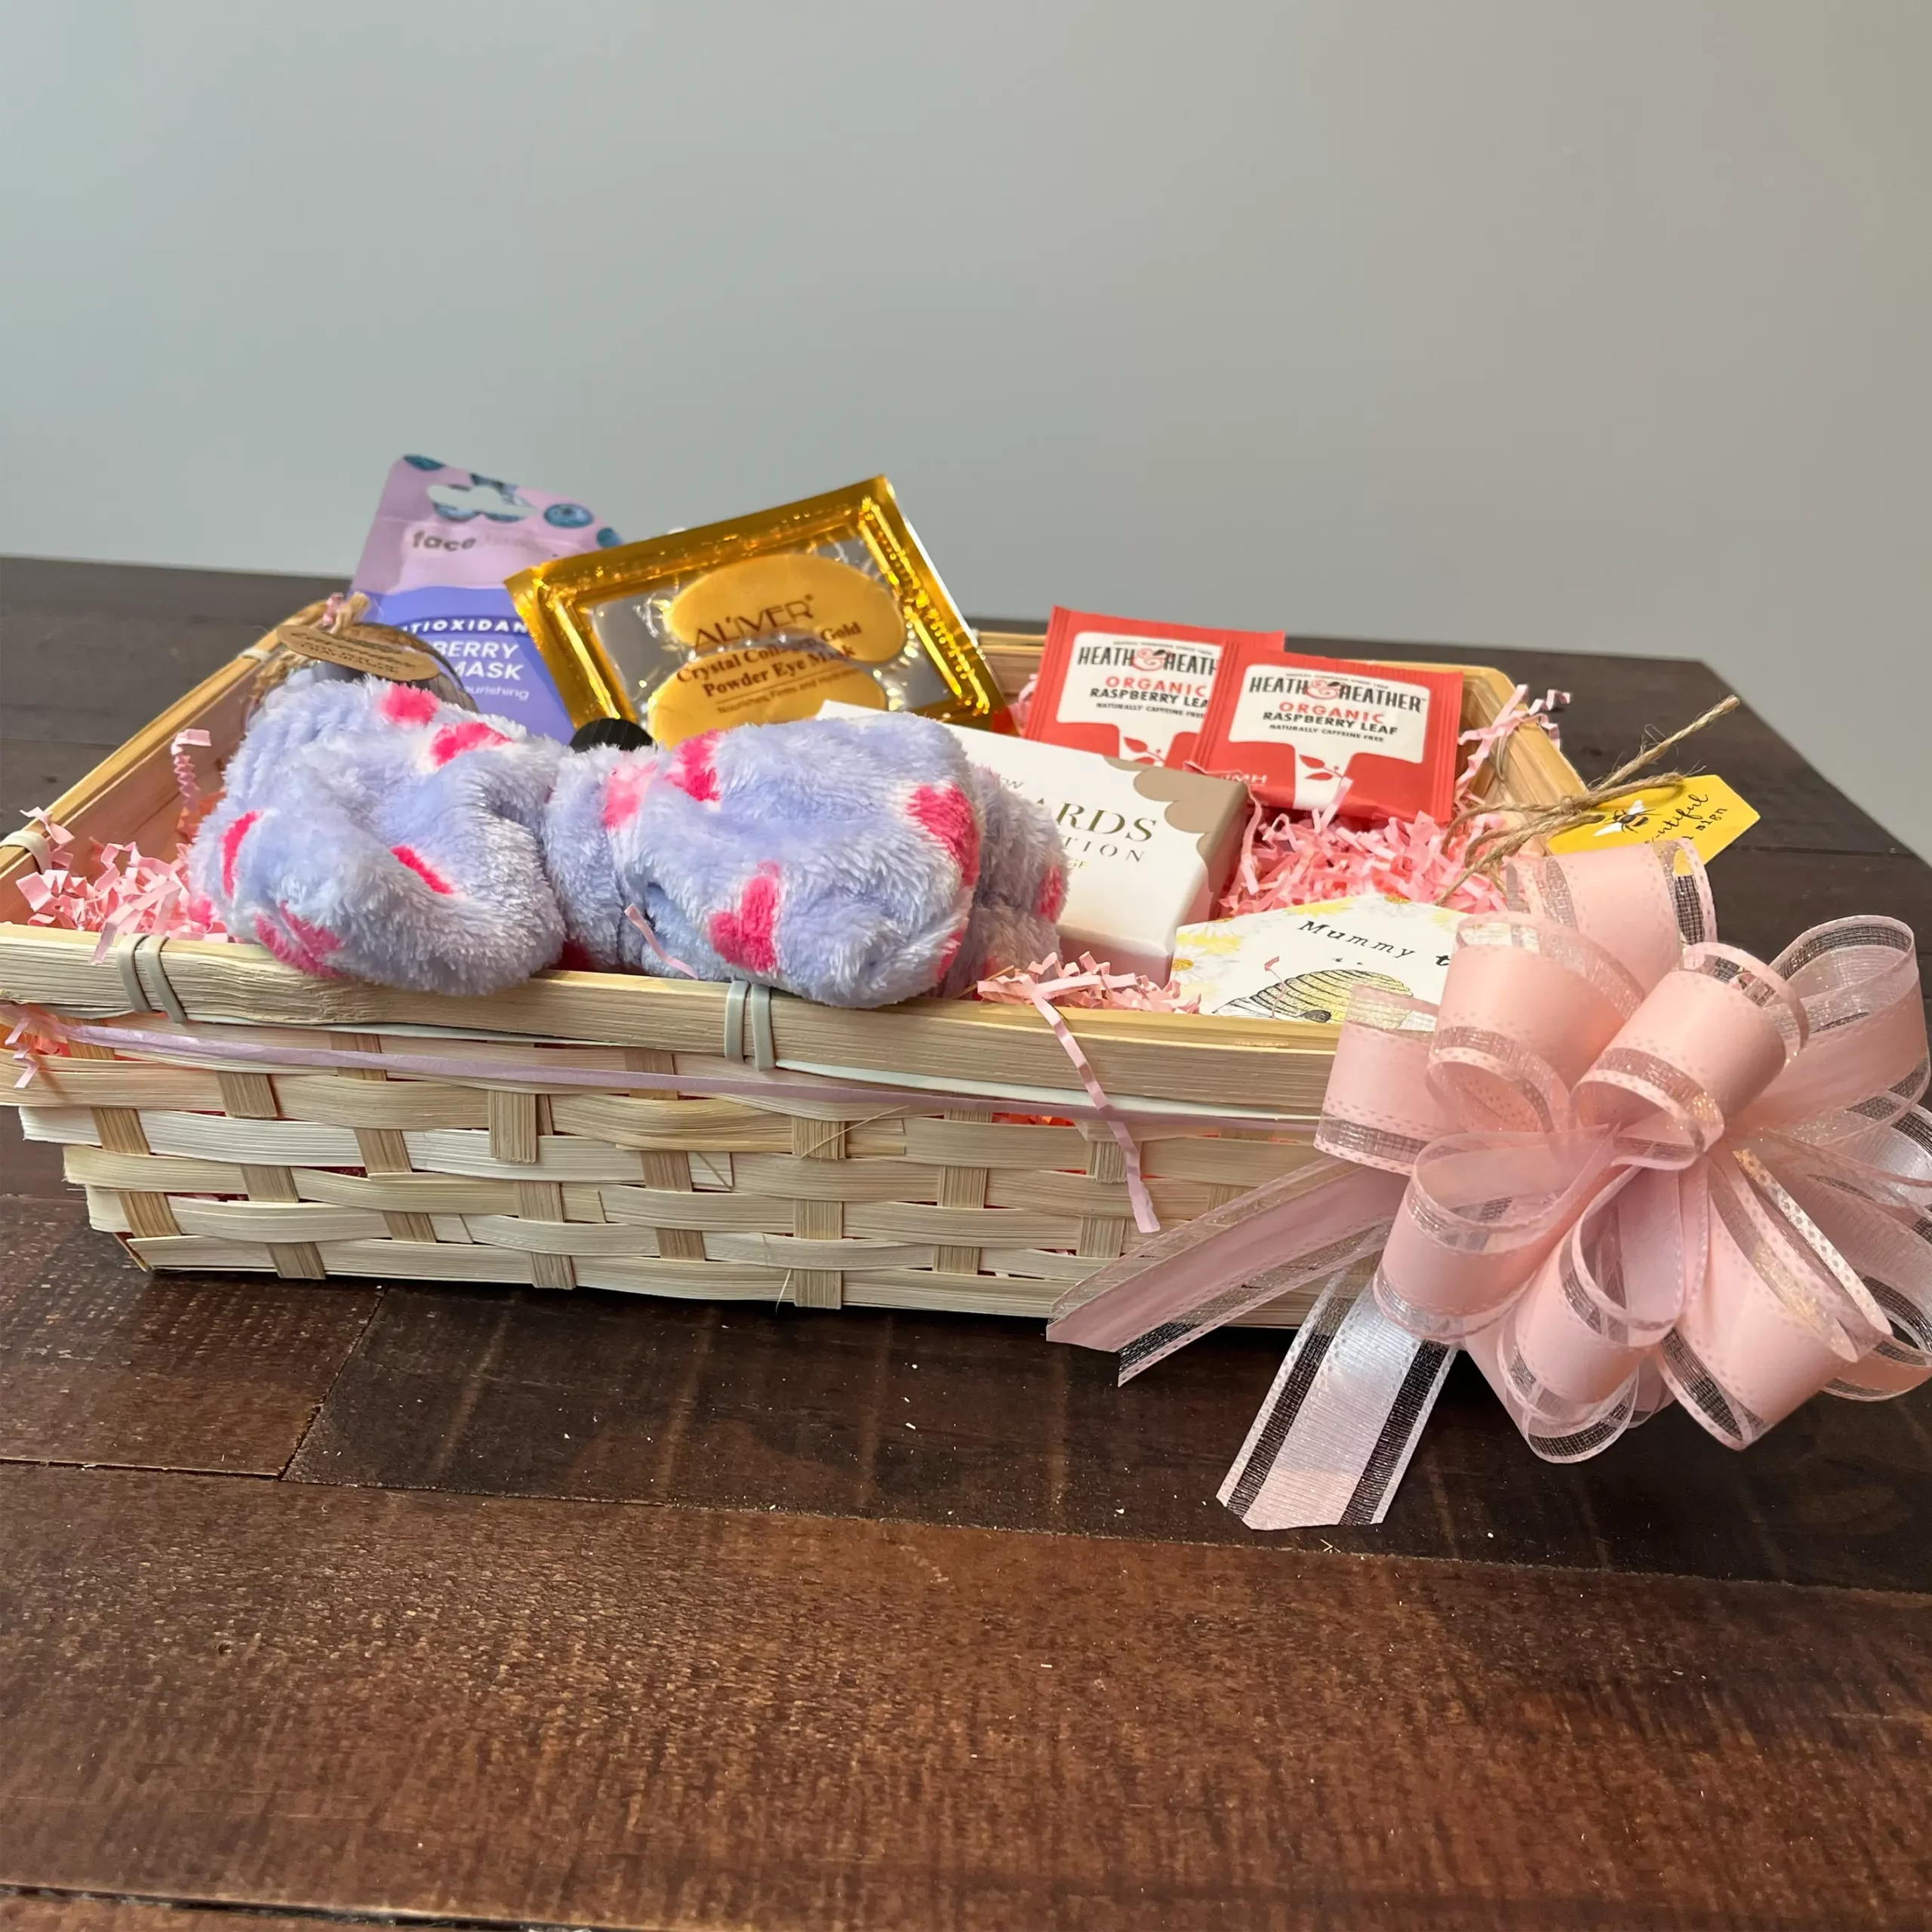 Buy New Mum Gift, New Mum Hamper, New Mum Gift Basket, New Mum Gift Box,  New Mother Gift, Pregnancy Gift for First Time Moms, Mum to Be Gift Online  in India -